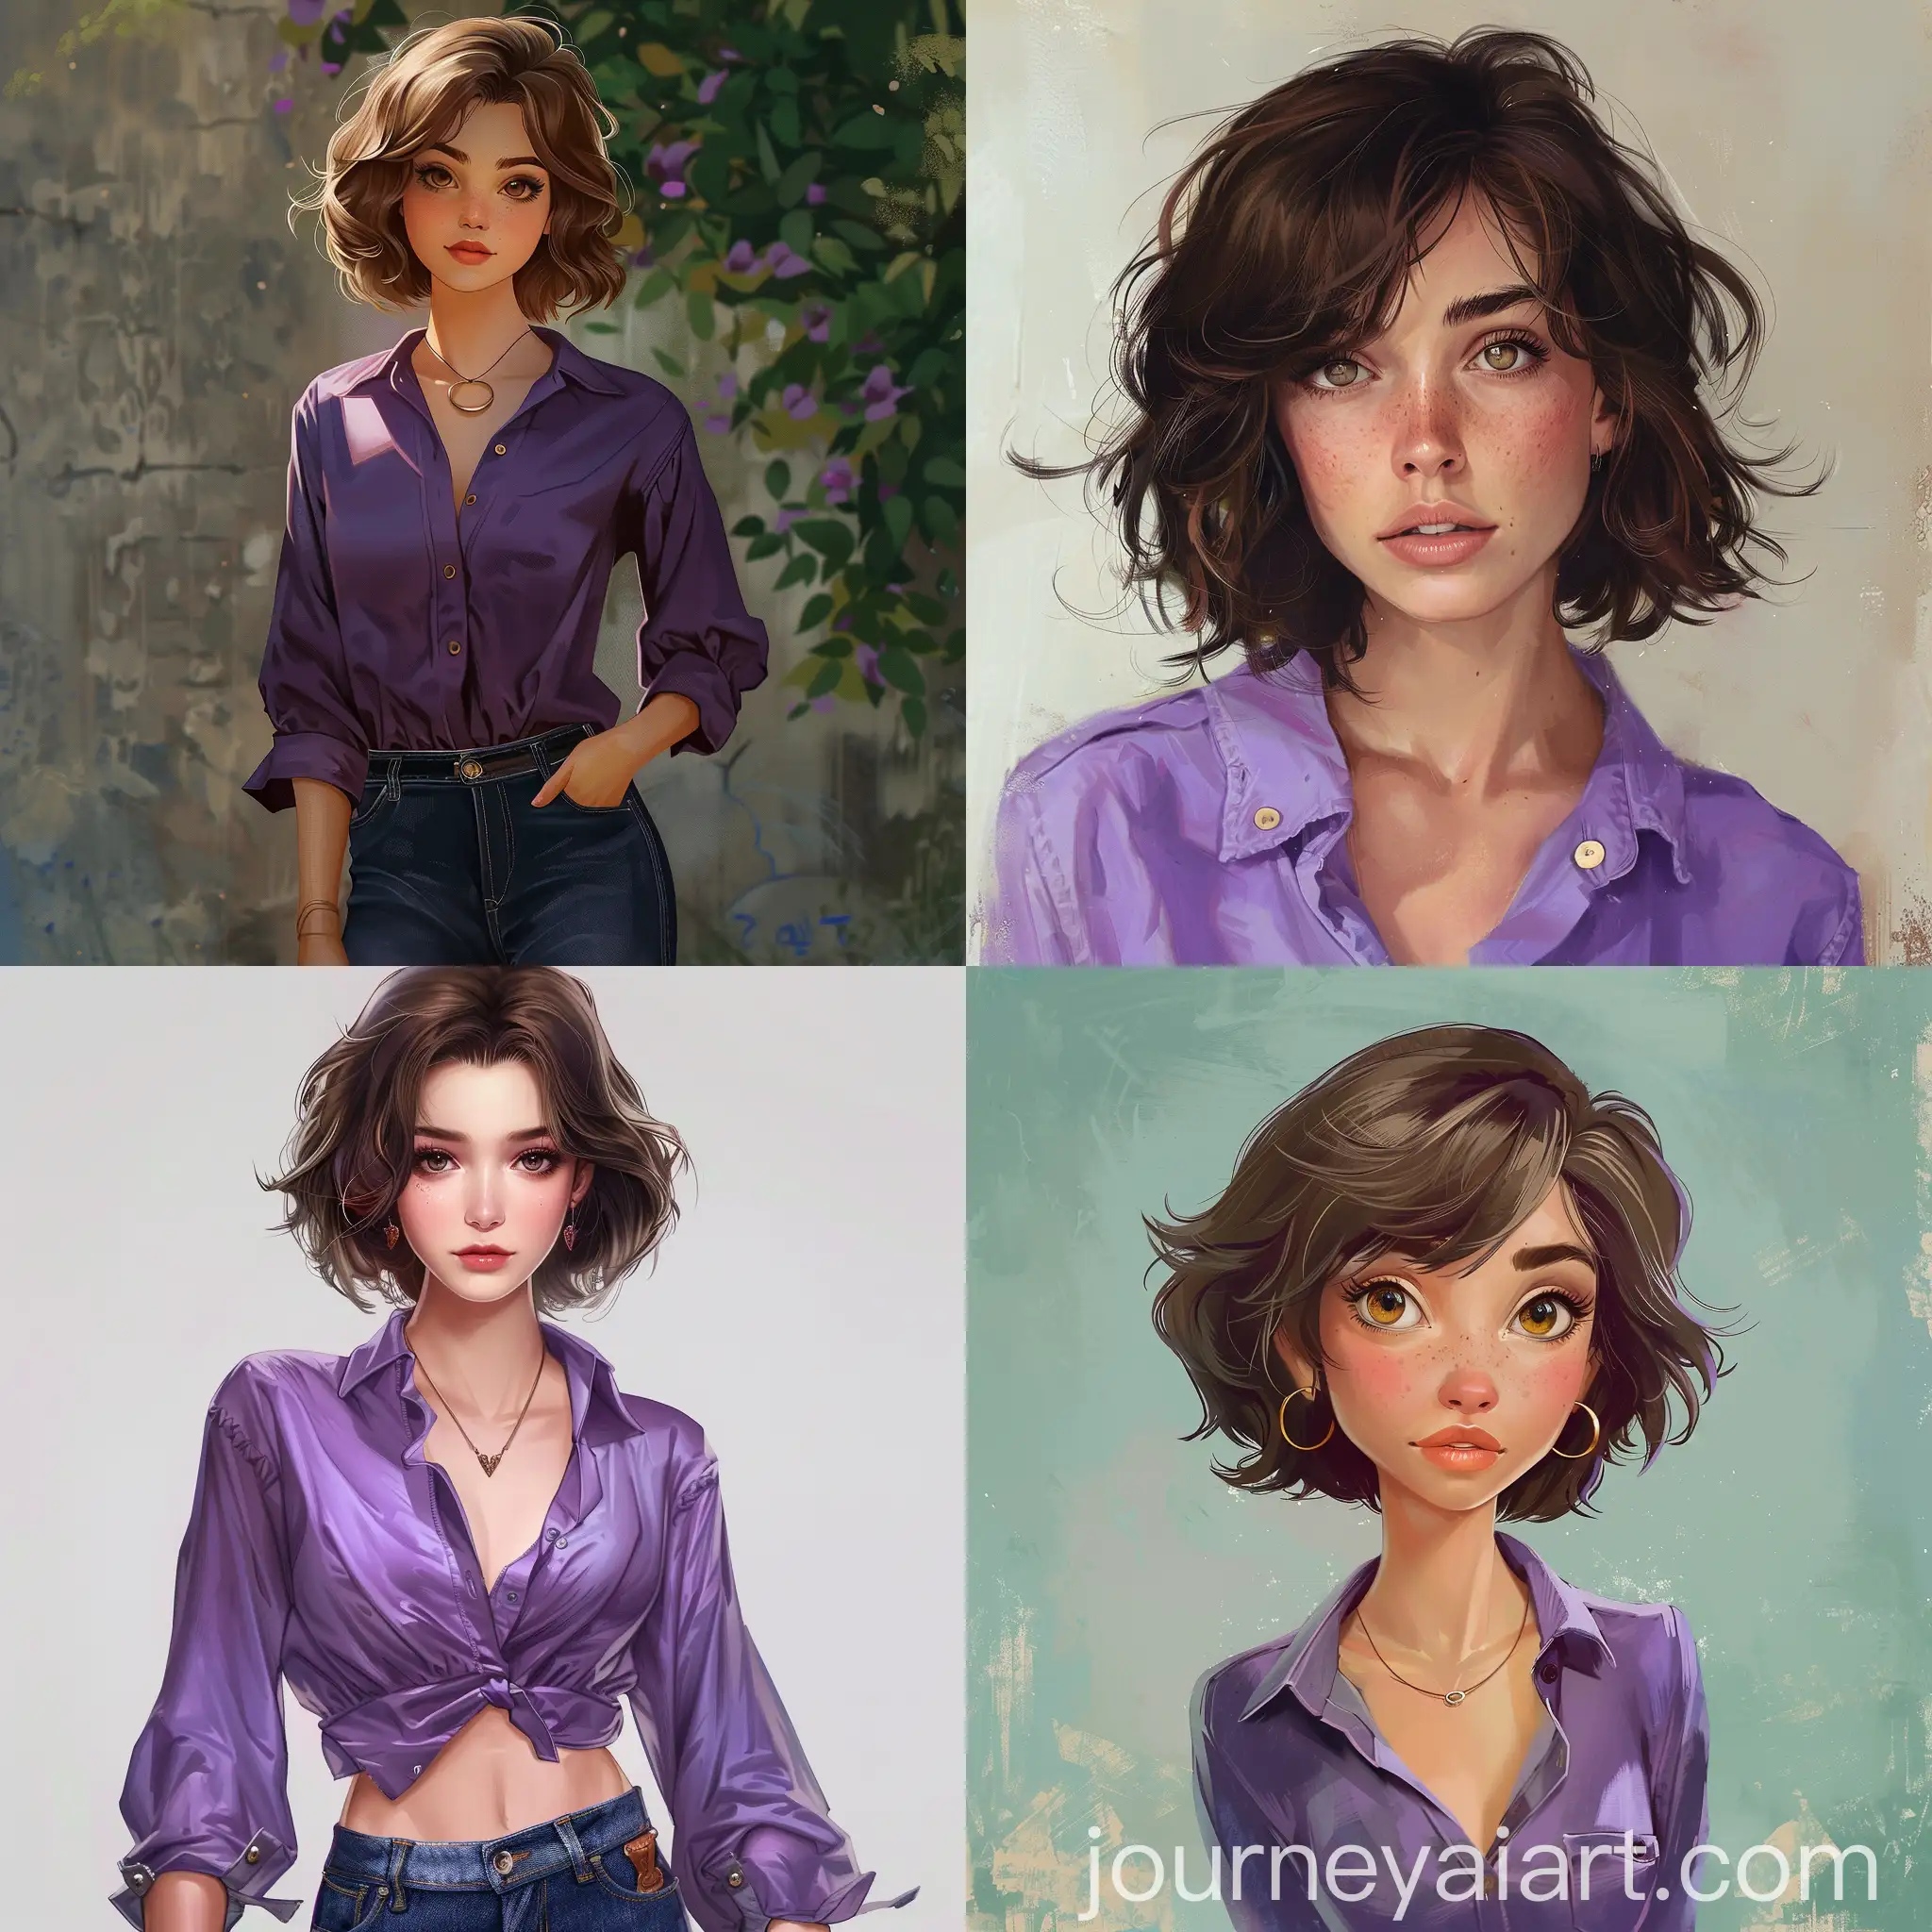 Mom-with-Medium-Short-Brown-Hair-in-Purple-Blouse